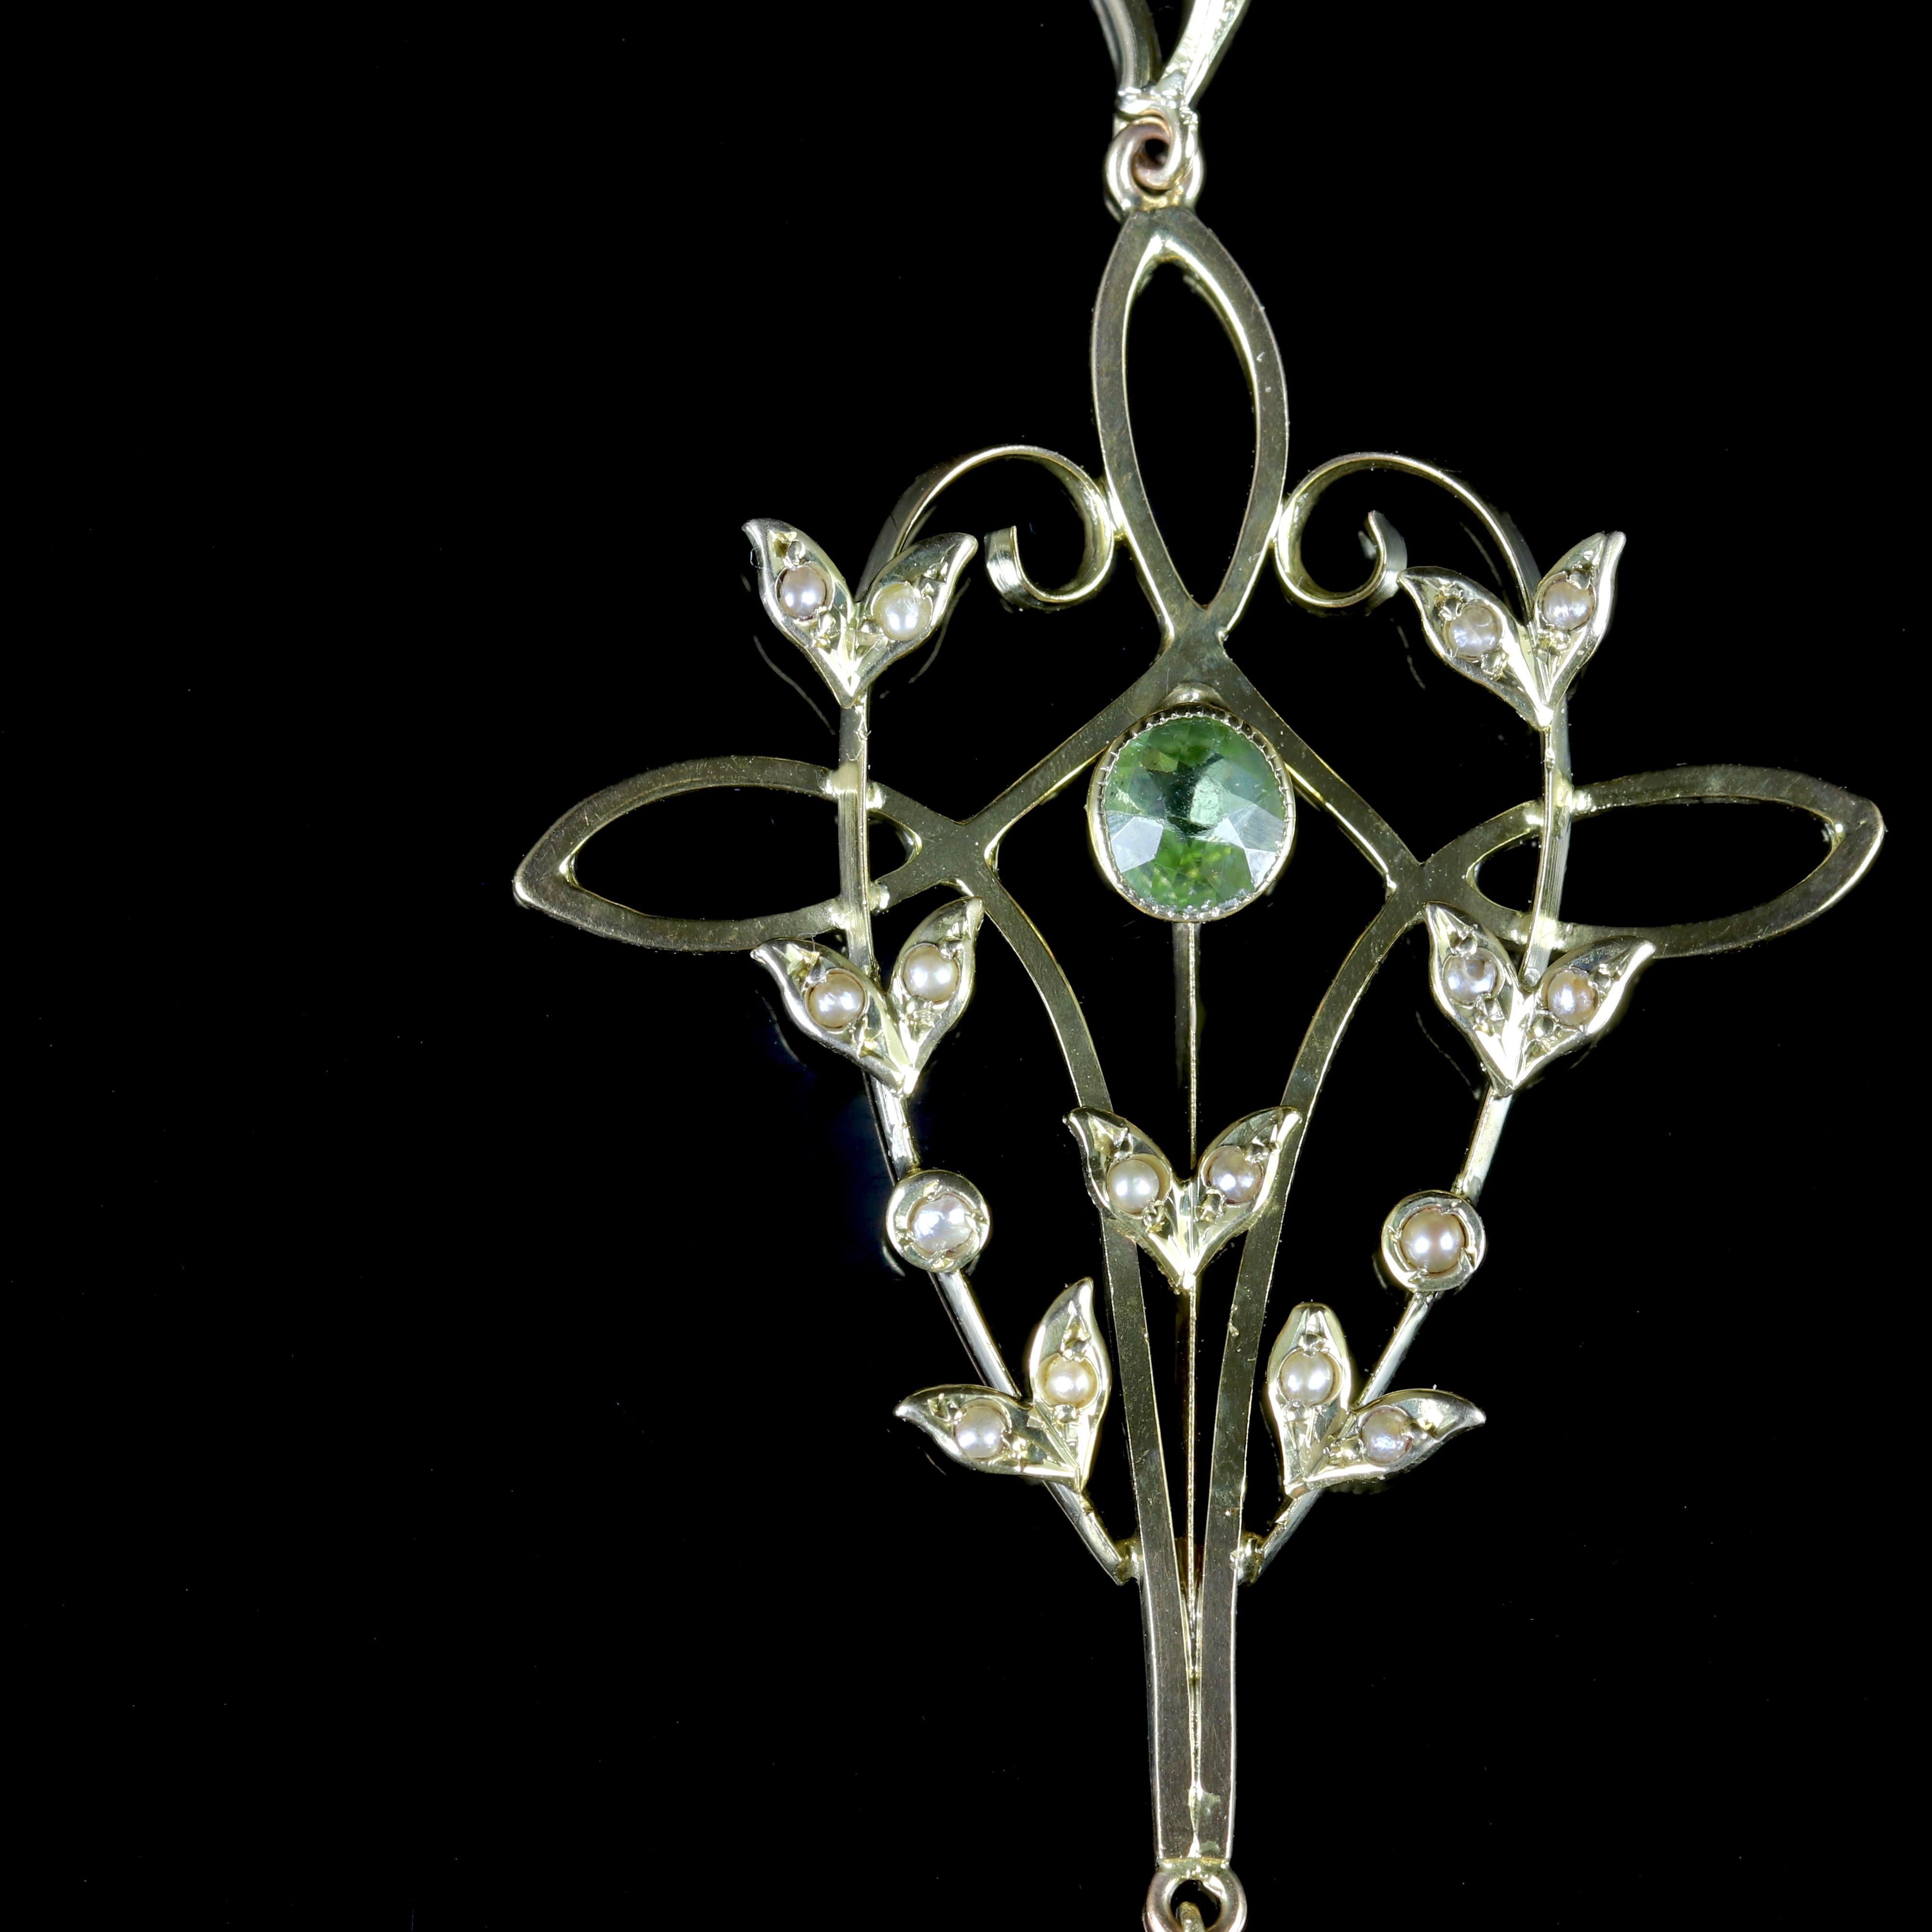 This fabulous 9ct Victorian Suffragette Pendant is Circa 1900.

The beautiful pendant is set with lustrous Pearls, a pretty 0.25ct Peridot and a 0.20ct deep purple Amethyst dropper. 

The combination of gemstones represent such a powerful